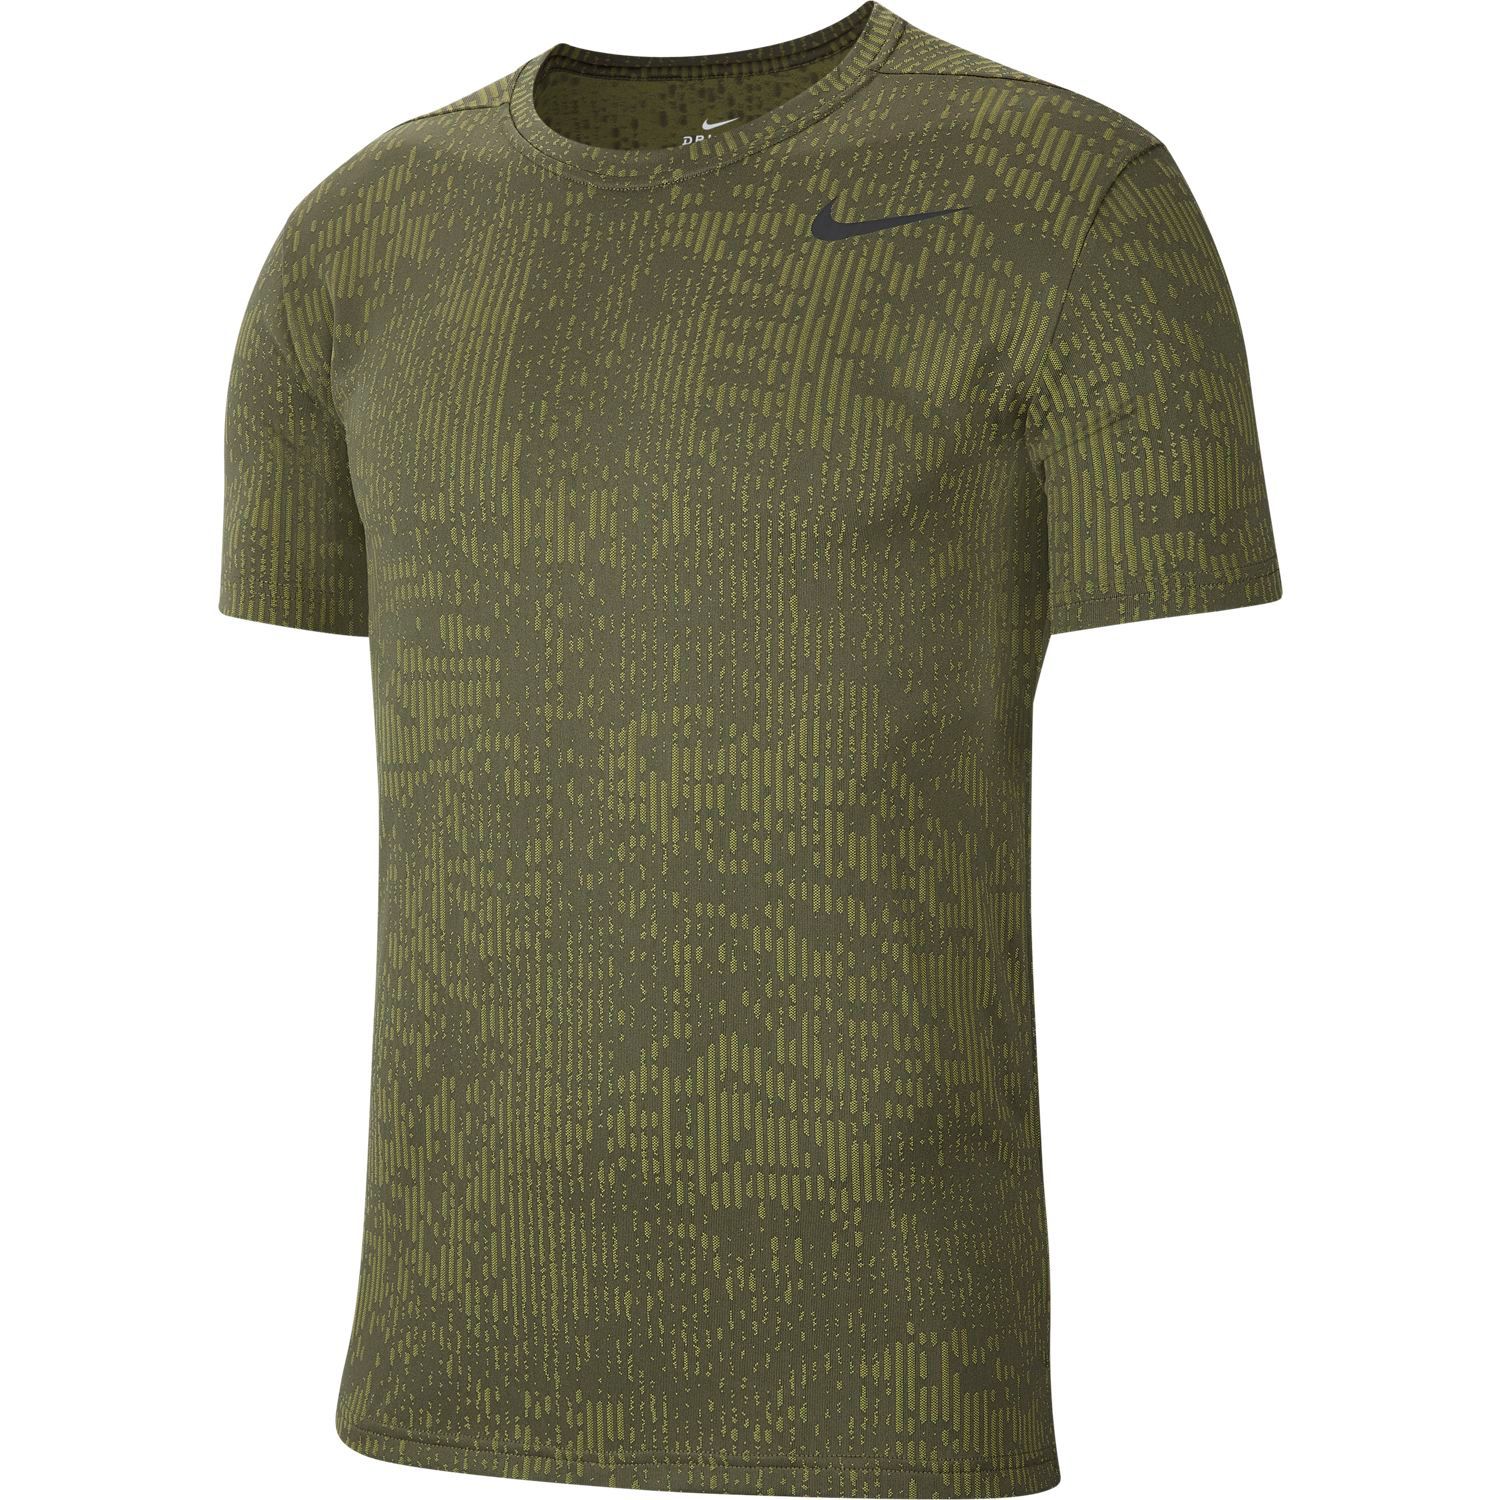 nike men's clothing clearance